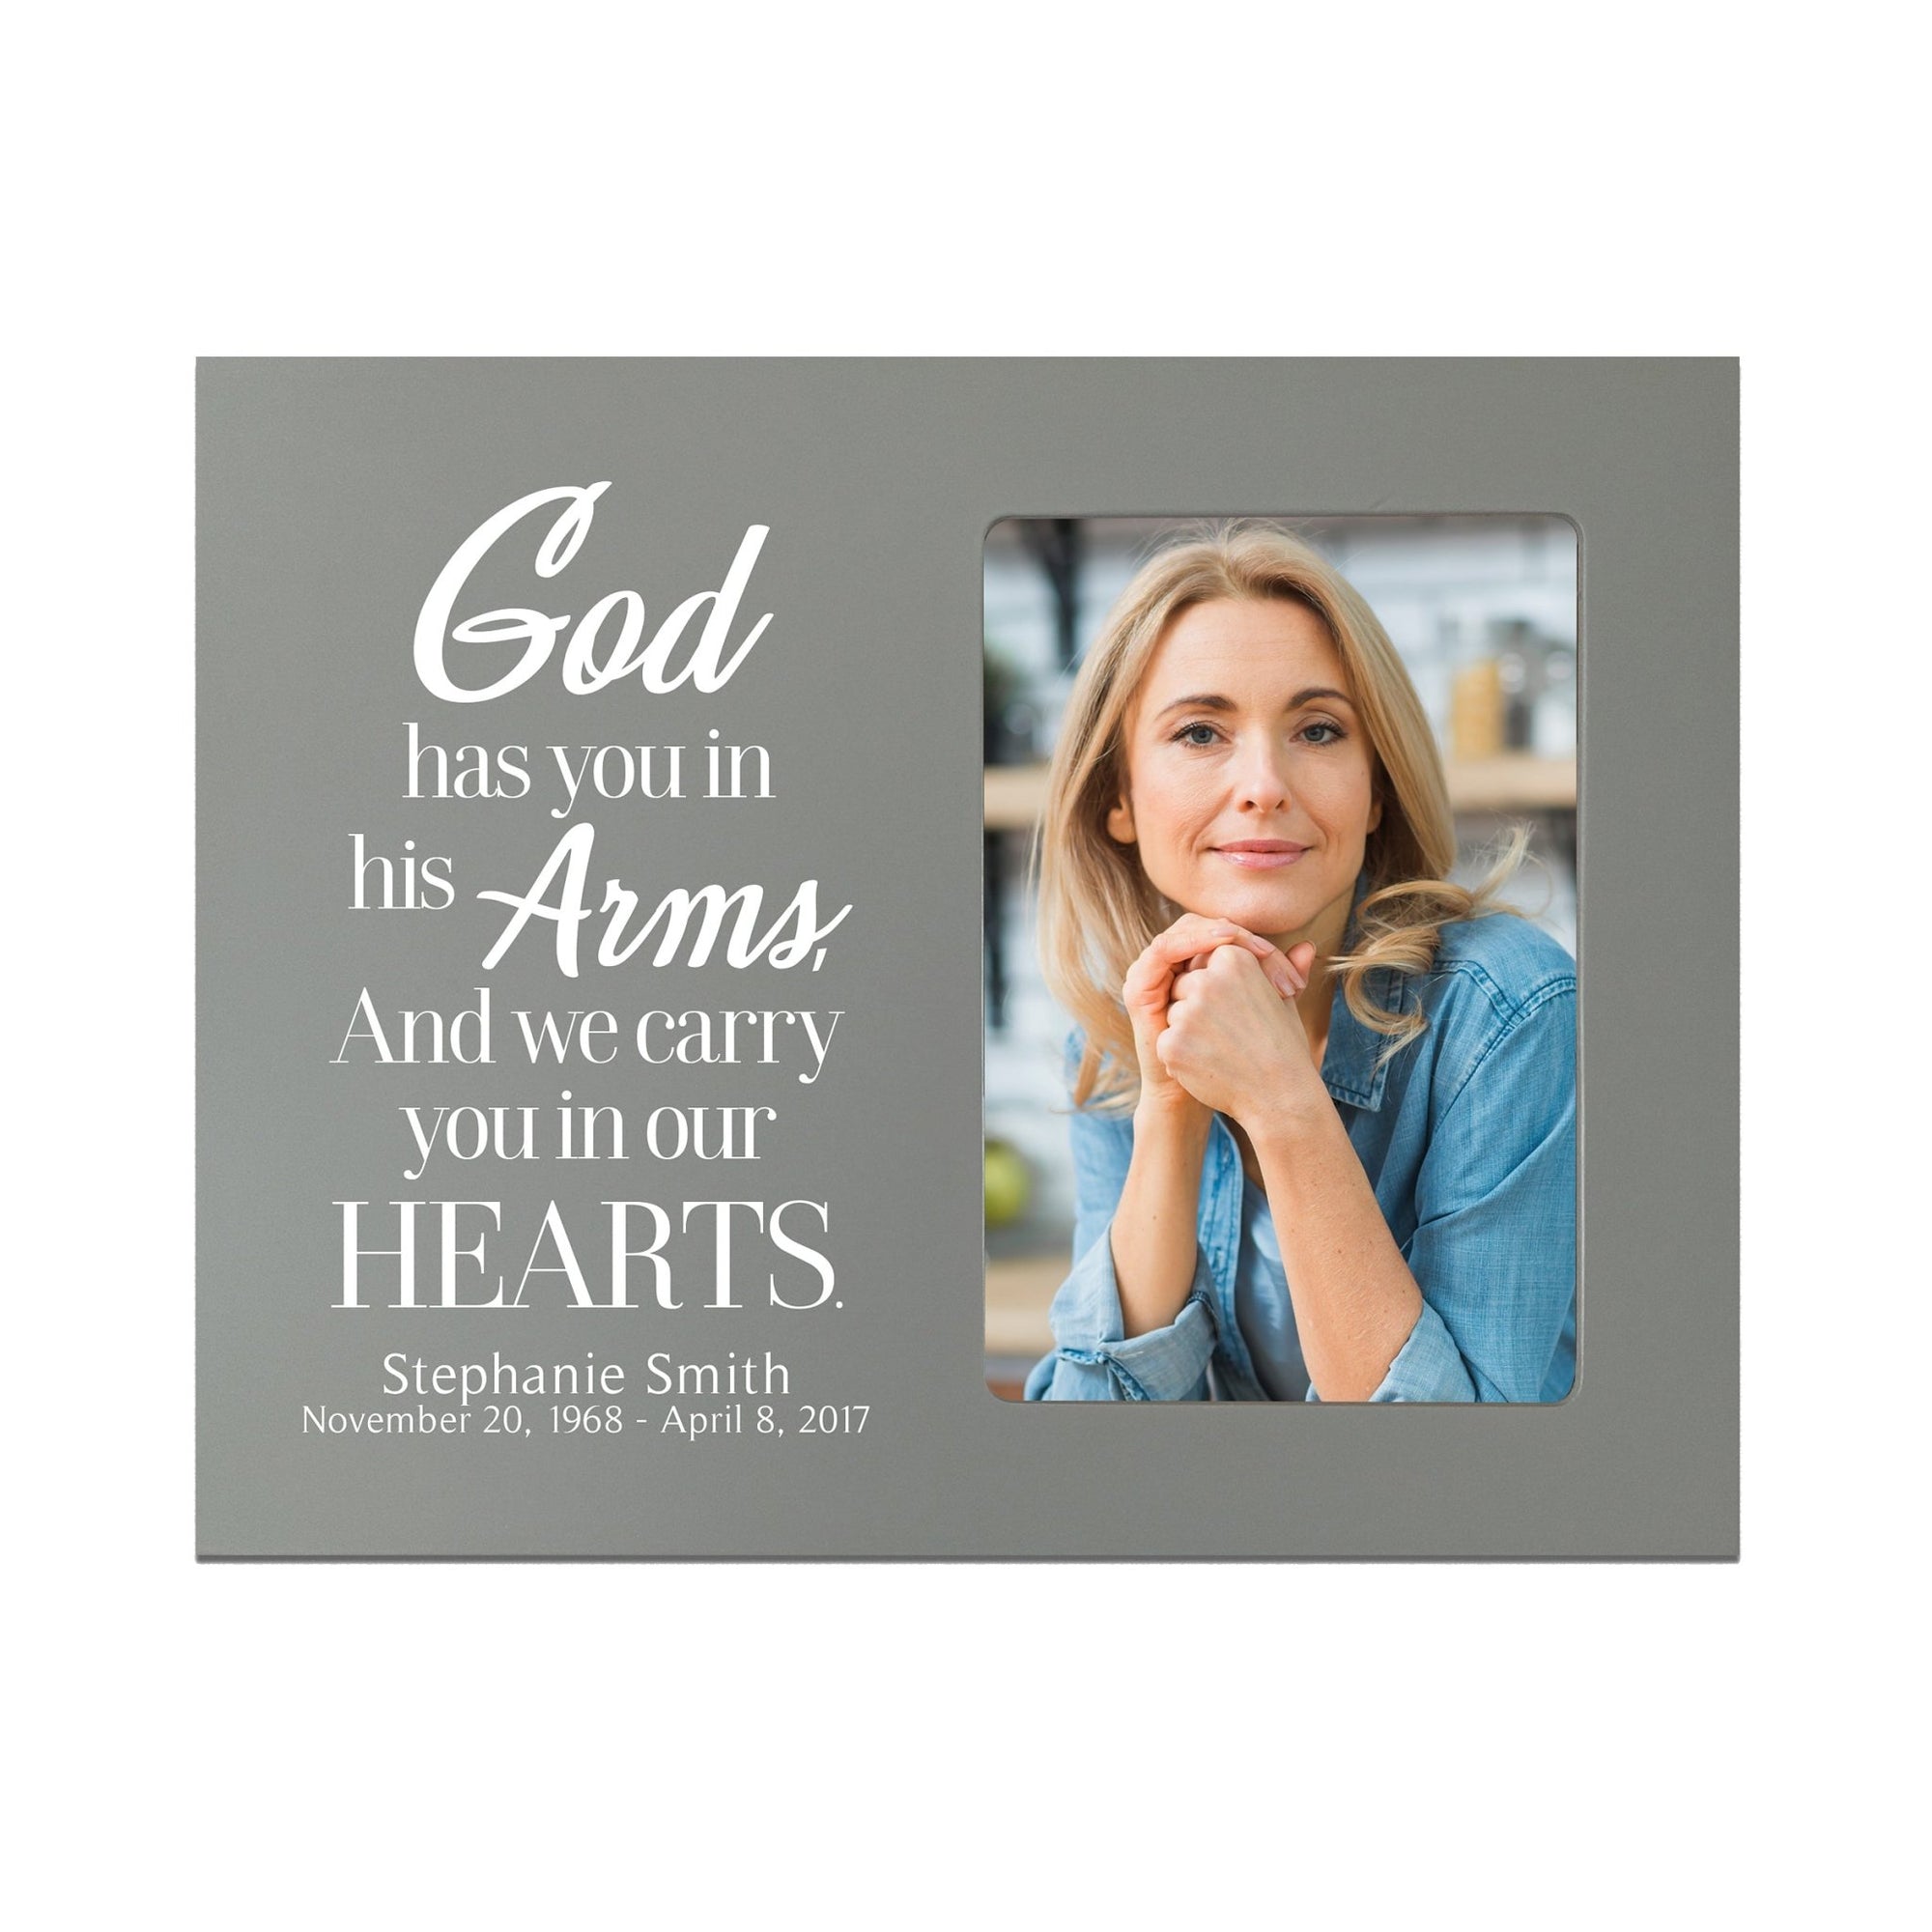 Personalized Wooden Memorial Picture Frame 8x10 holds 4x6 photo God Has You - LifeSong Milestones